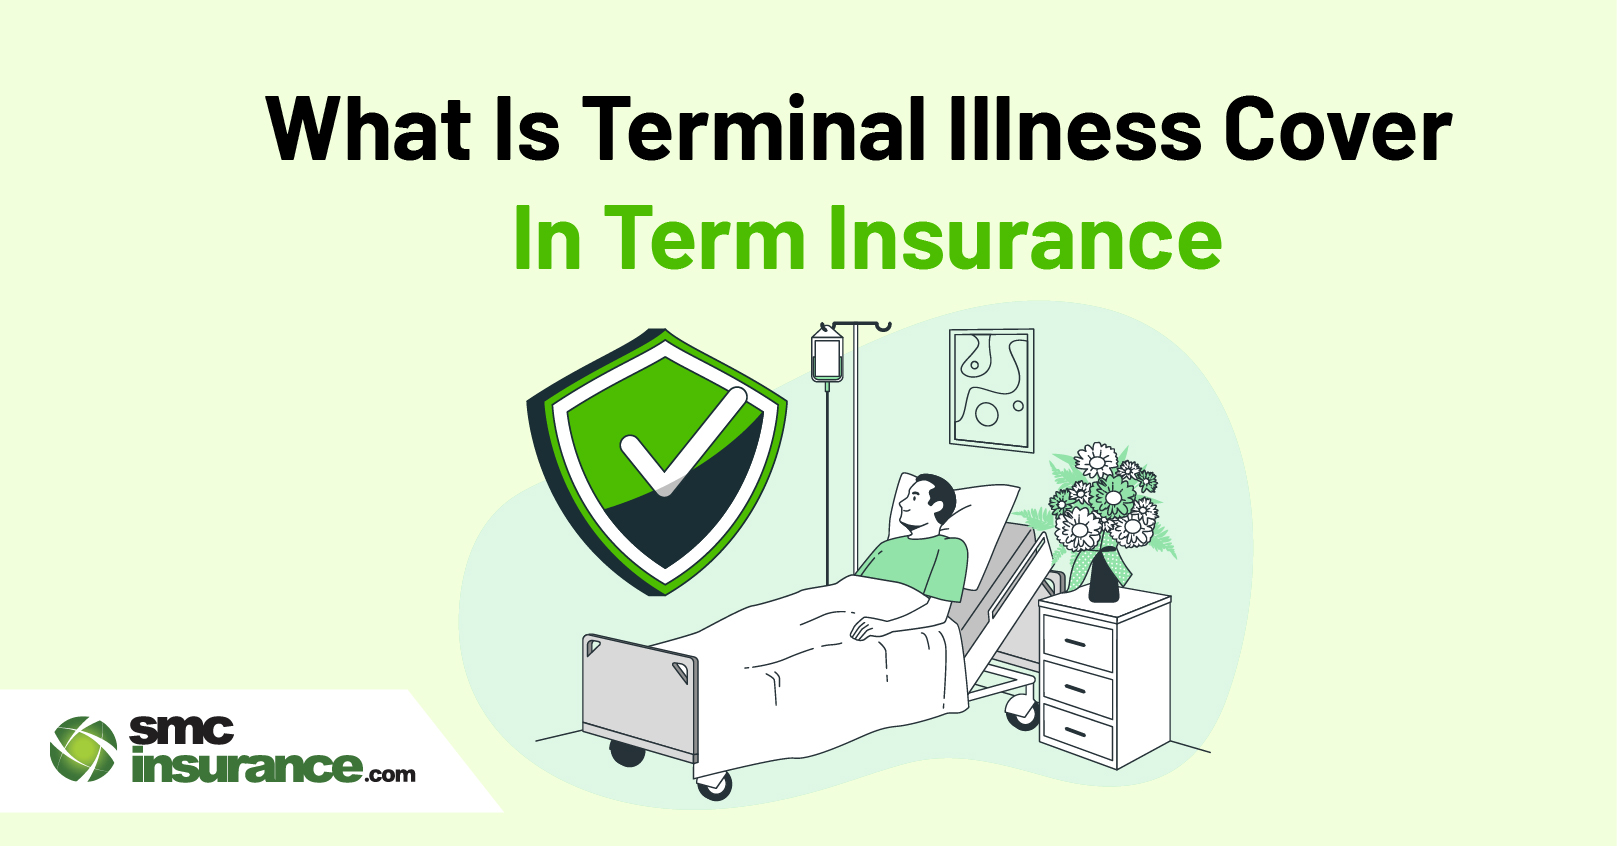 What Is Terminal Illness Cover In Term Insurance?